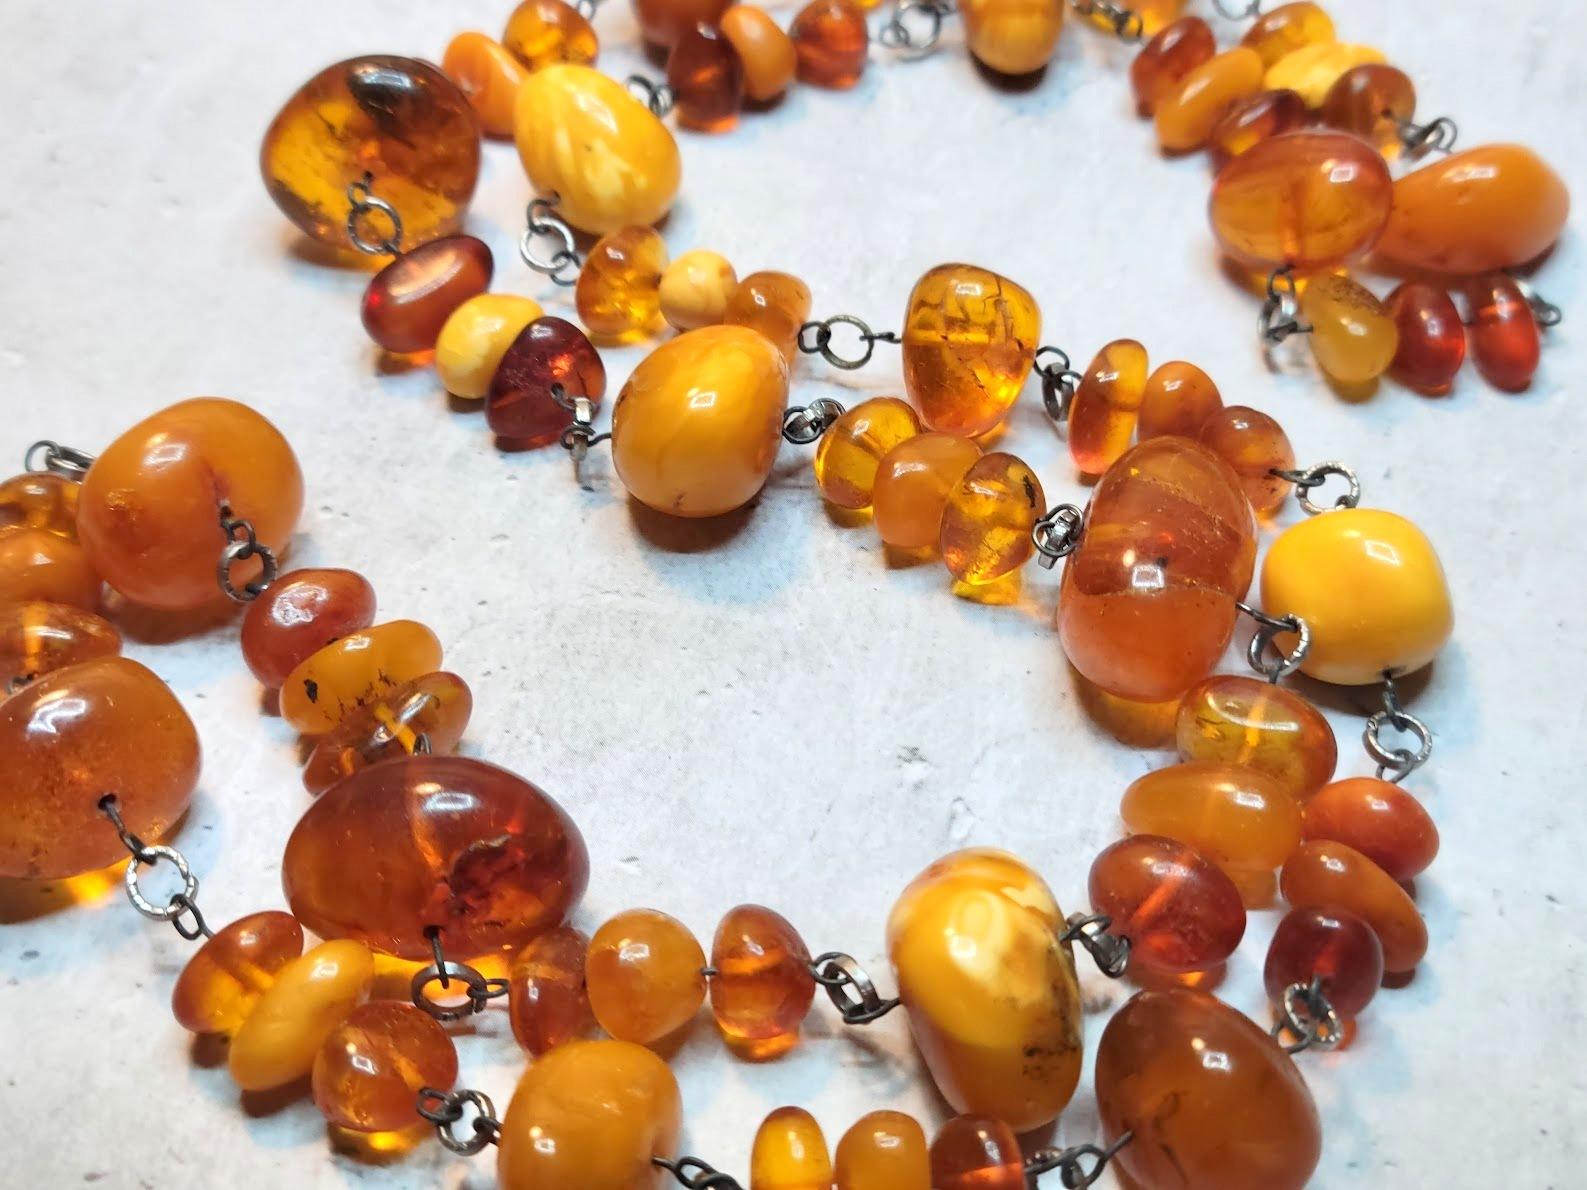 antique baltic amber necklace